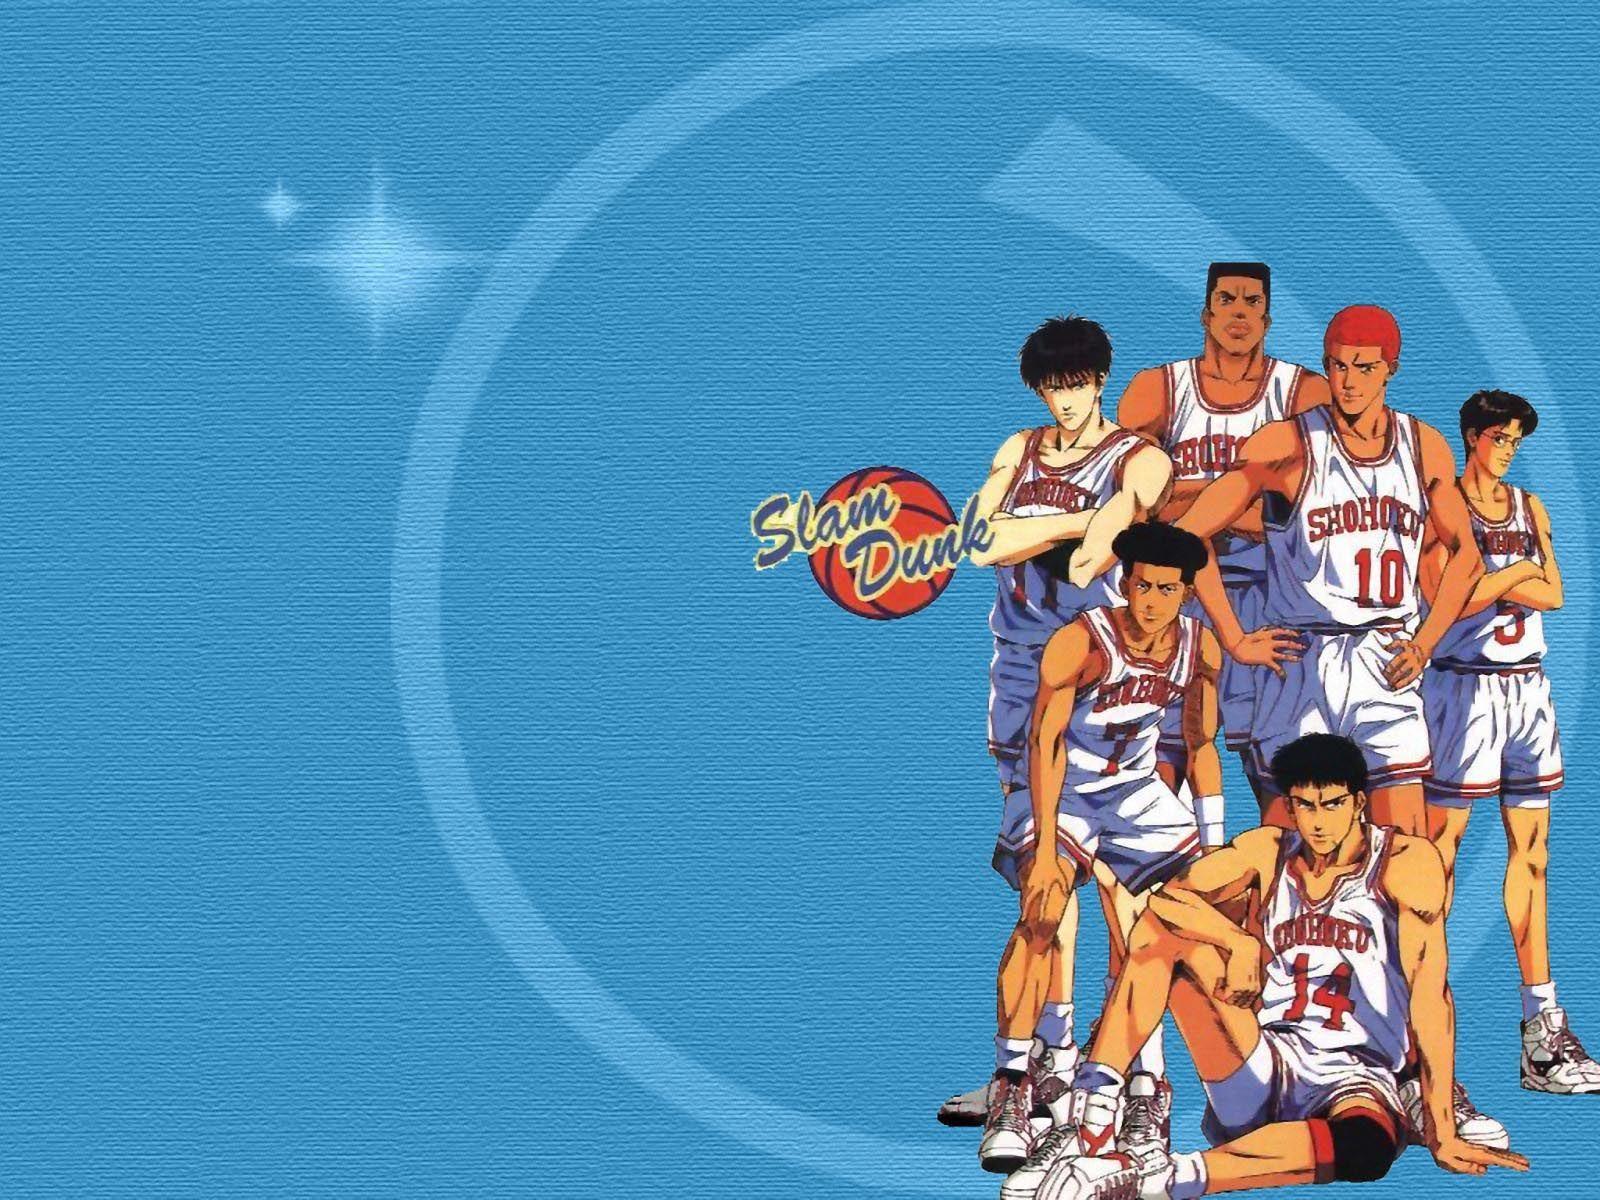 Slam Dunk Anime Wallpapers Top Free Slam Dunk Anime Backgrounds Wallpaperaccess 0960